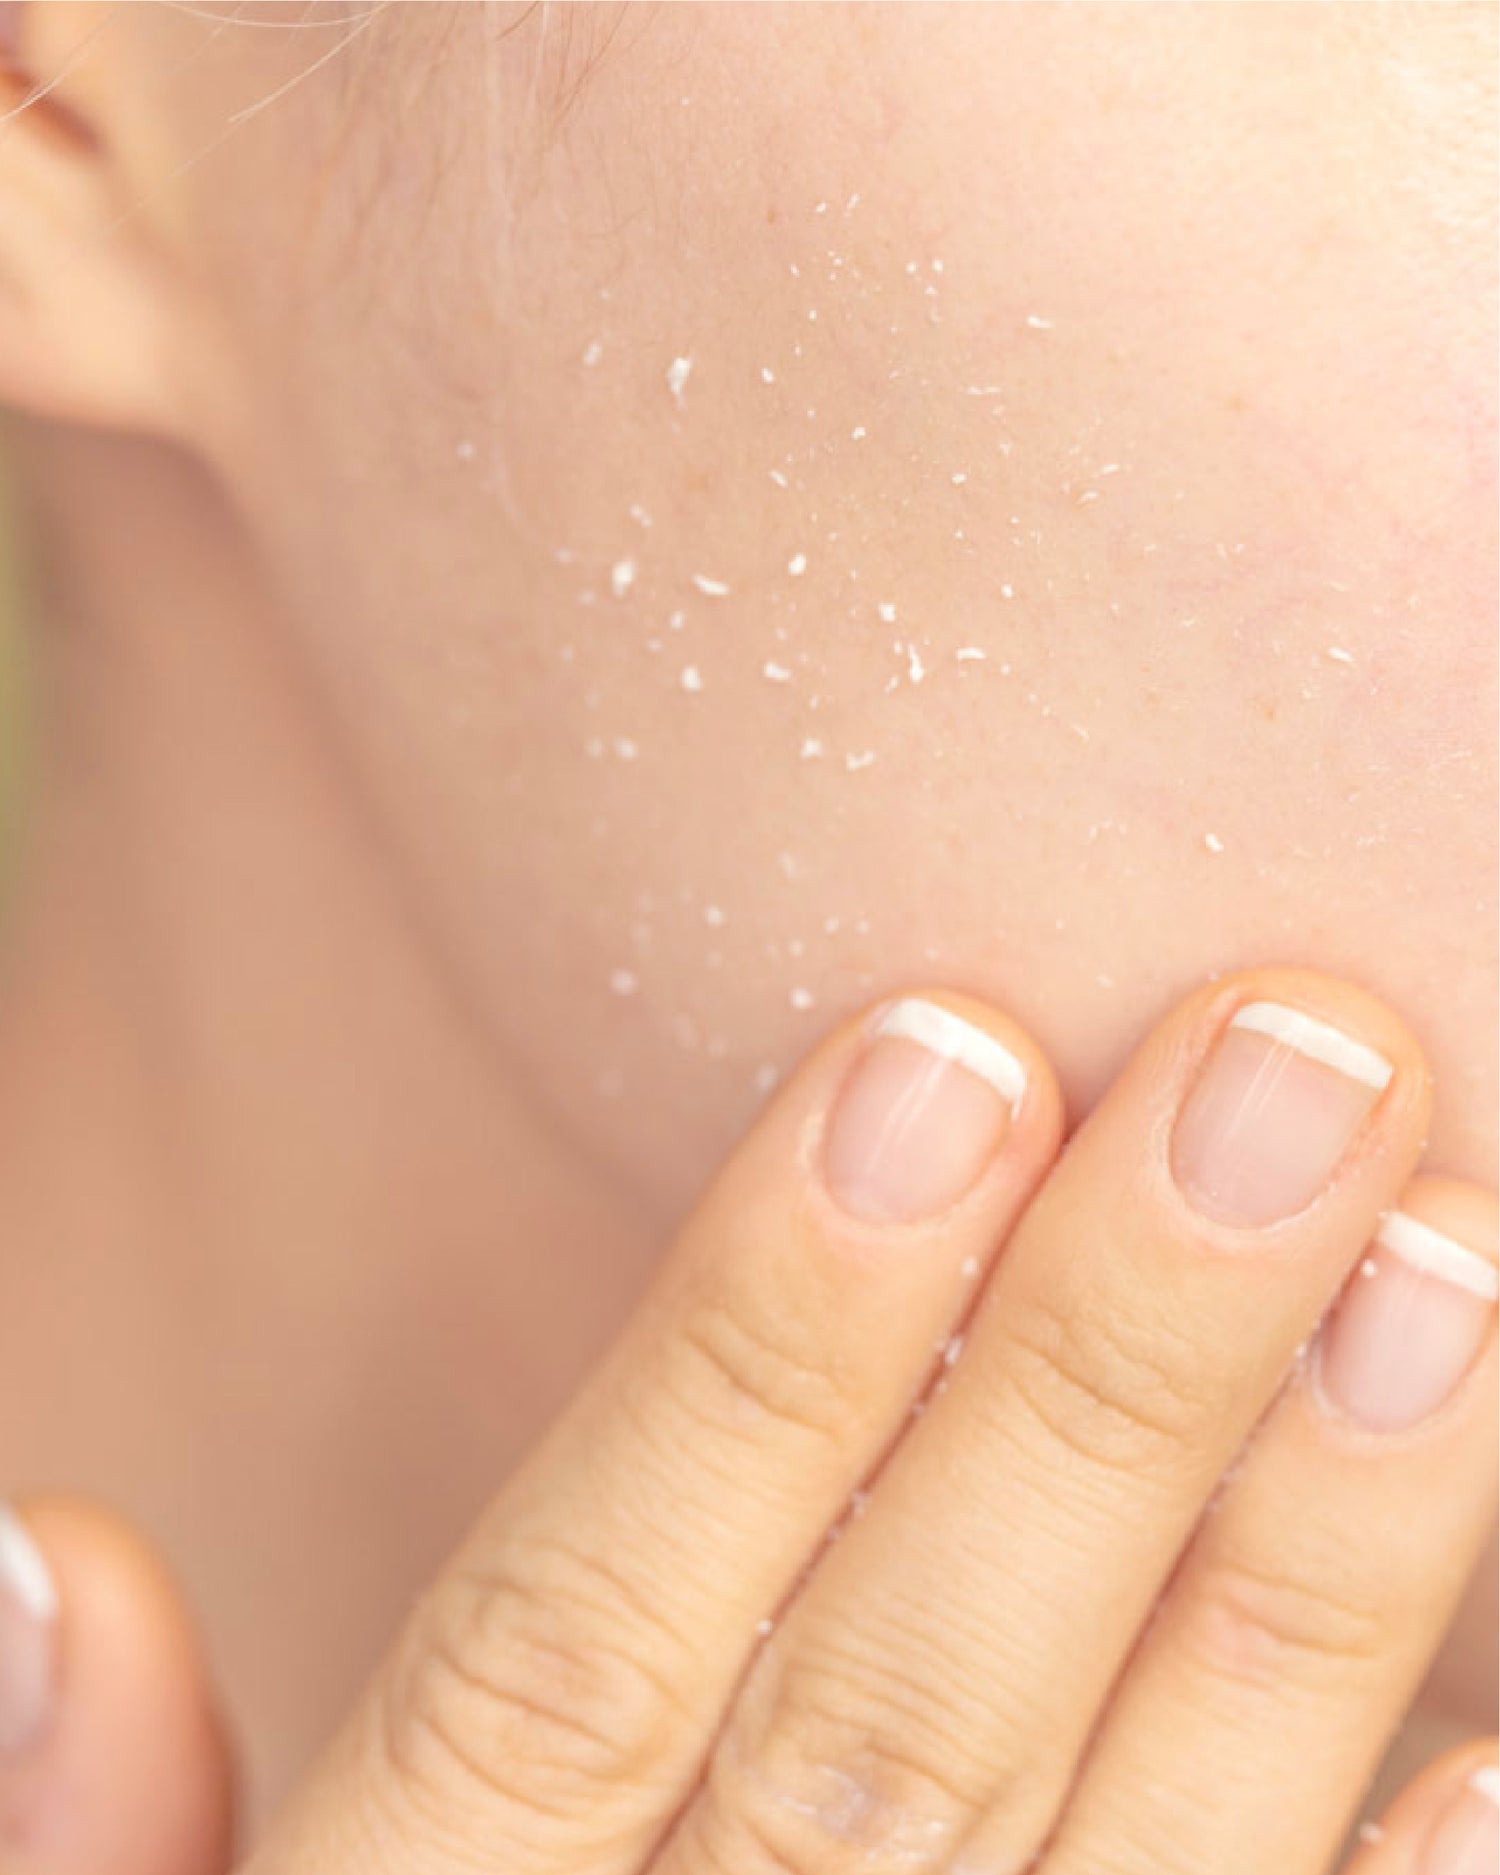 gentle exfoliator reacts to dead skin cells and turns to white beads on female face